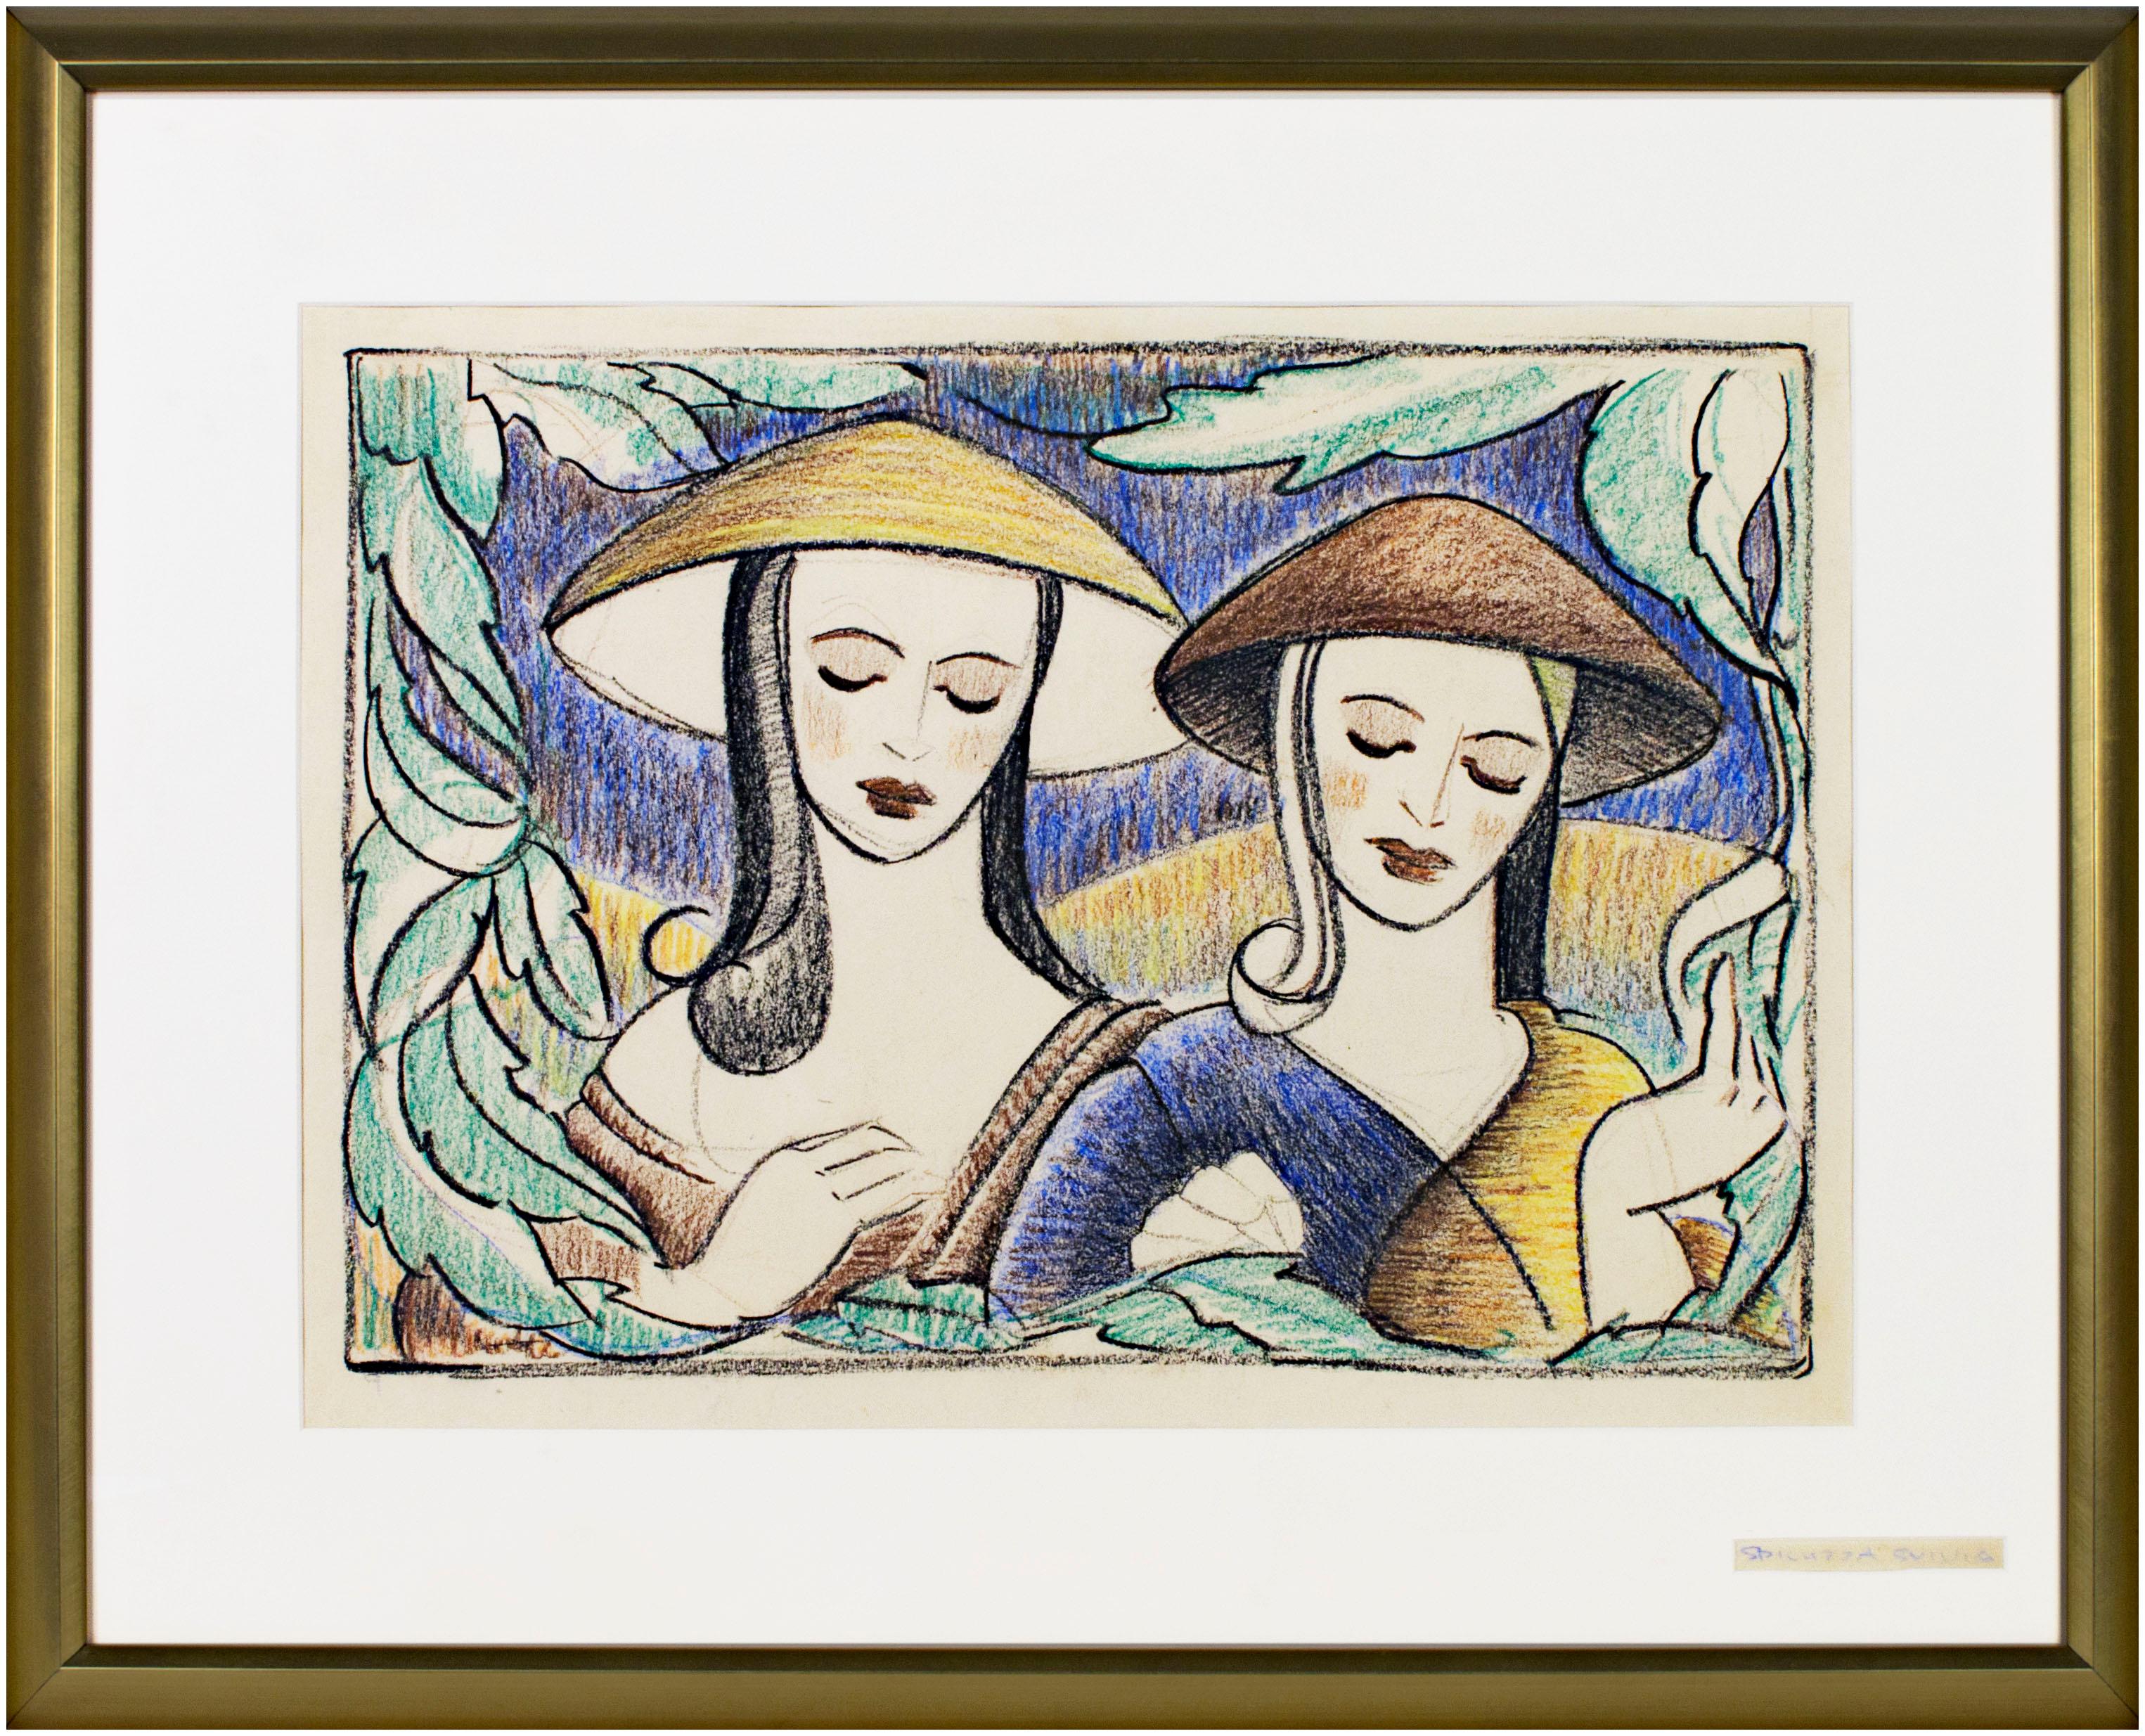 In this drawing, Sylvia Spicuzza presents the viewer with a bust-length view of two elegant women dressed in East Asian costume. Their faces reflect the ideal of beauty during the 1950s and '60s, with clean lipstick and downcast eyes, not unlike